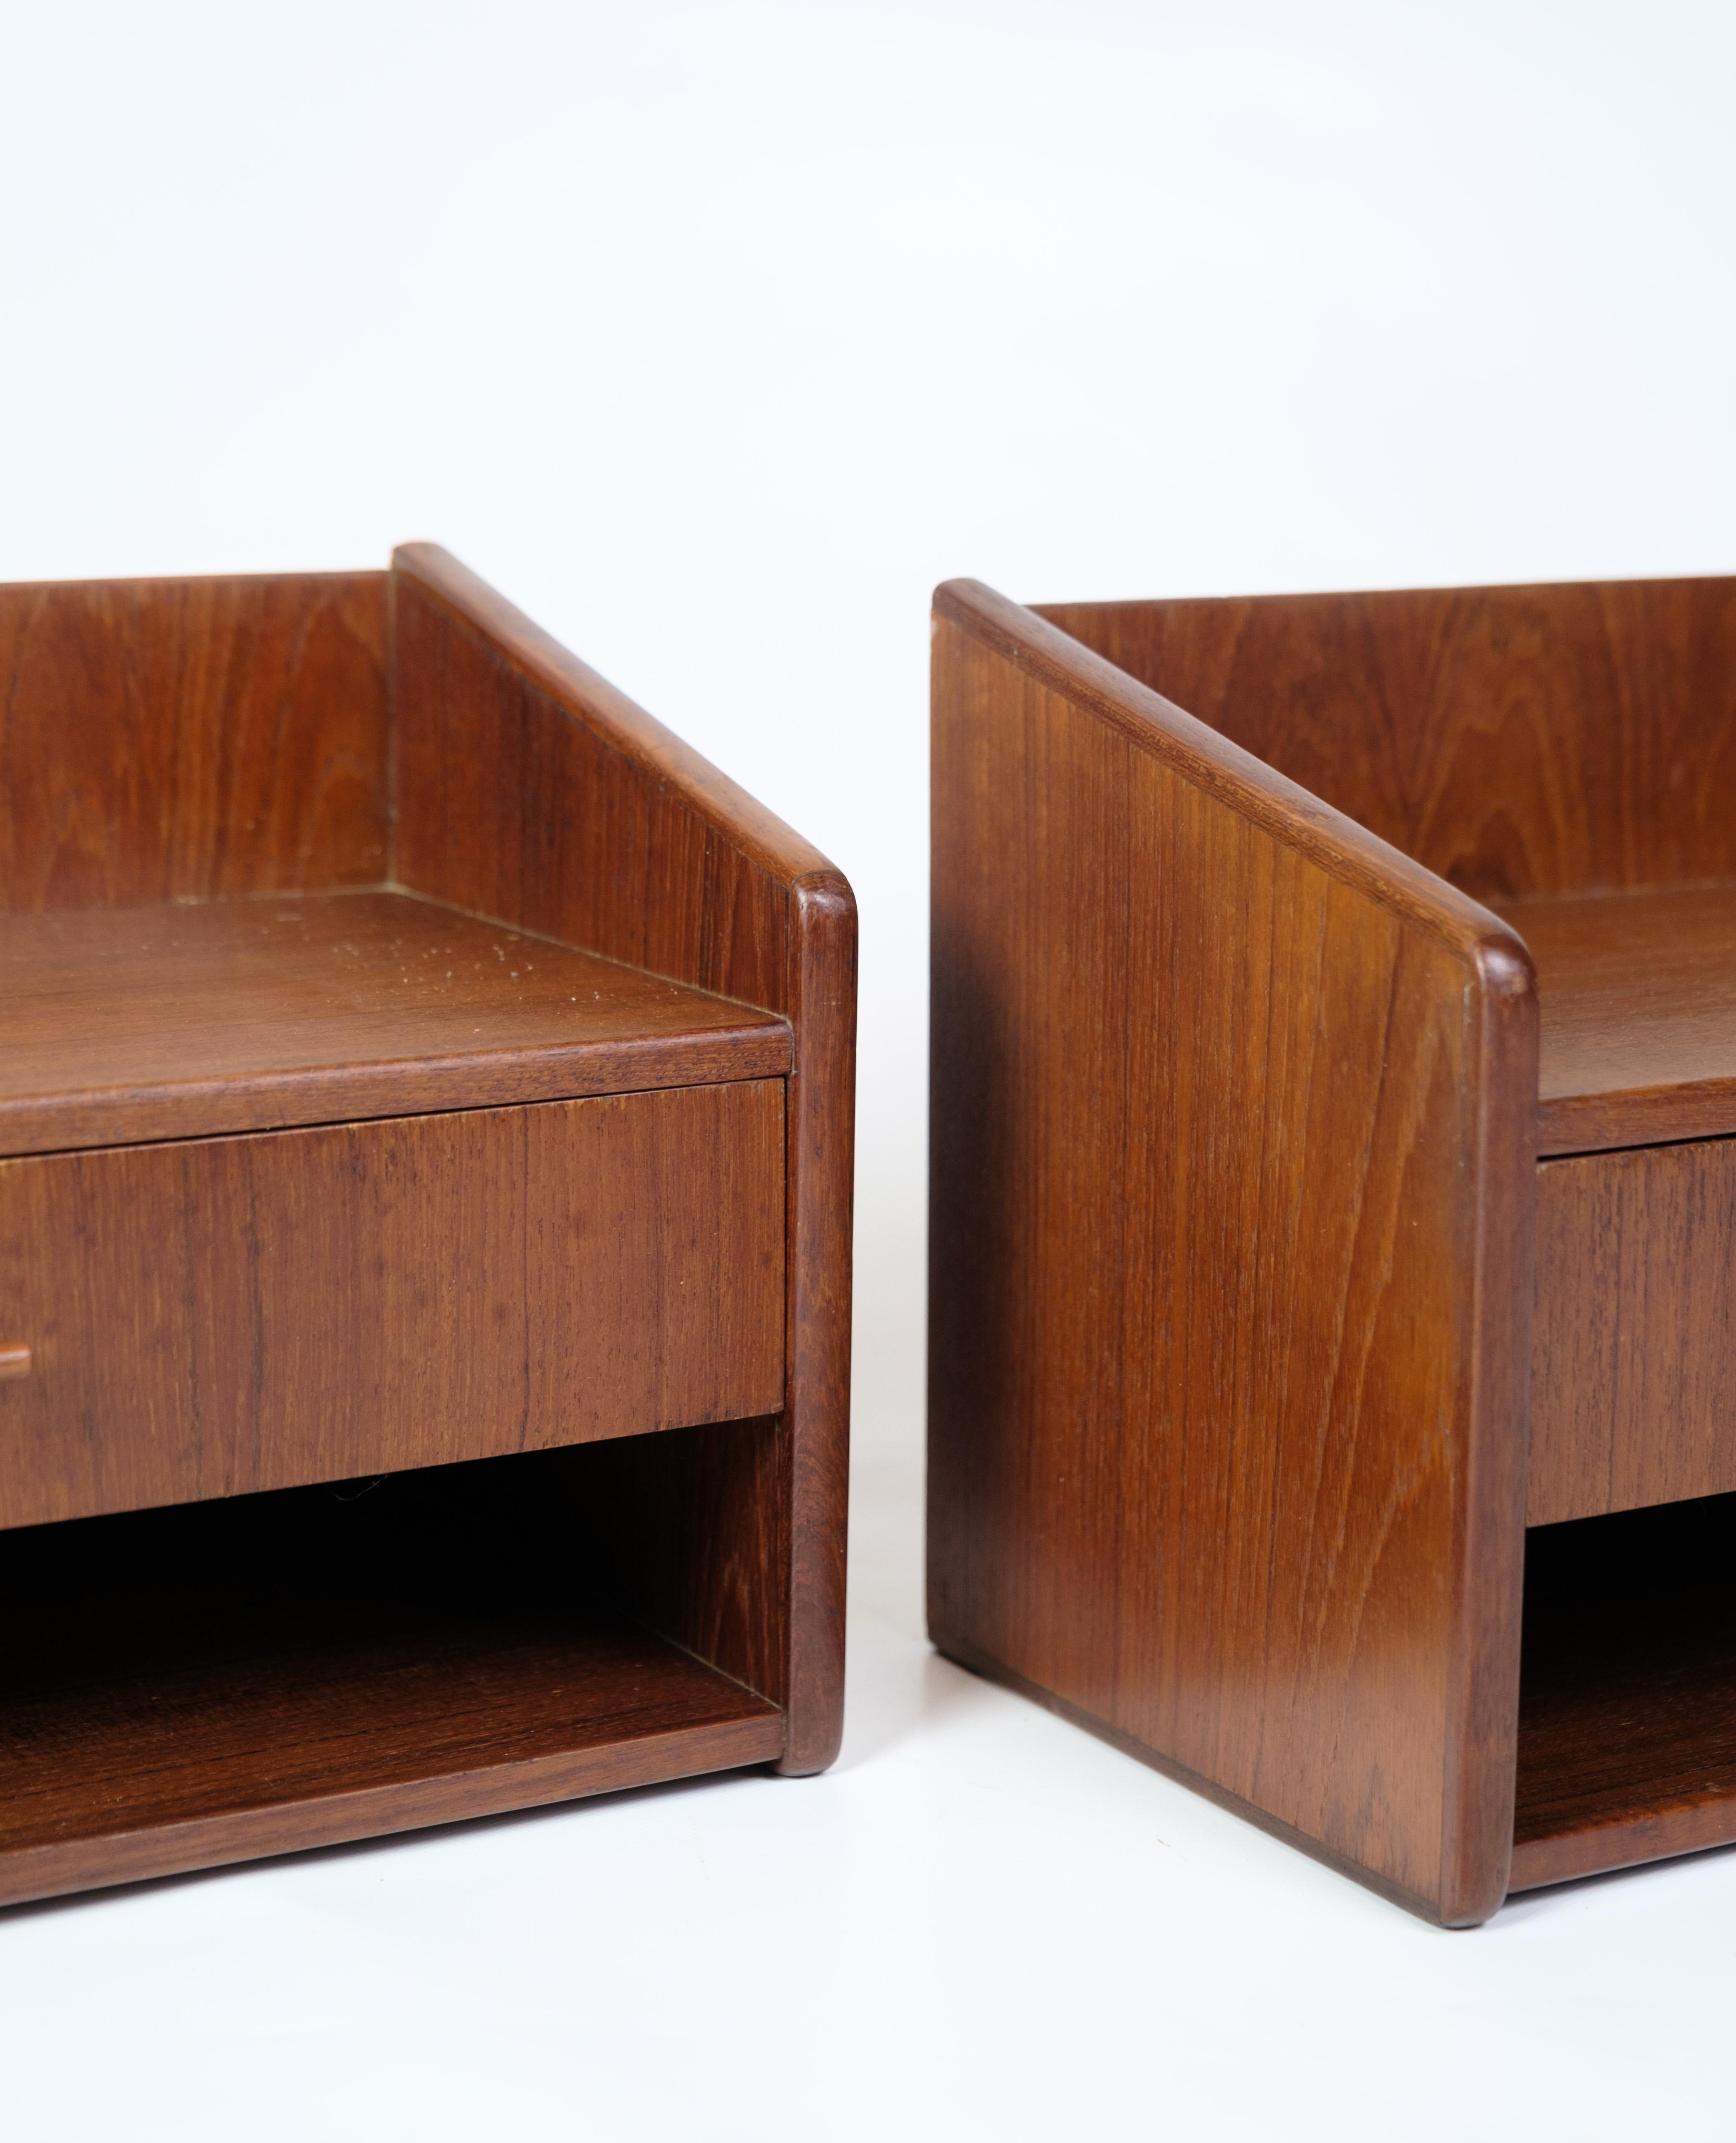 Vintage 1960s Teak Wall-Mounted Bedside Tables with Drawers – Elegant and Space-Saving

Introduce a touch of mid-century charm to your bedroom with this set of wall-mounted teak bedside tables, offering both elegance and practicality.

Crafted